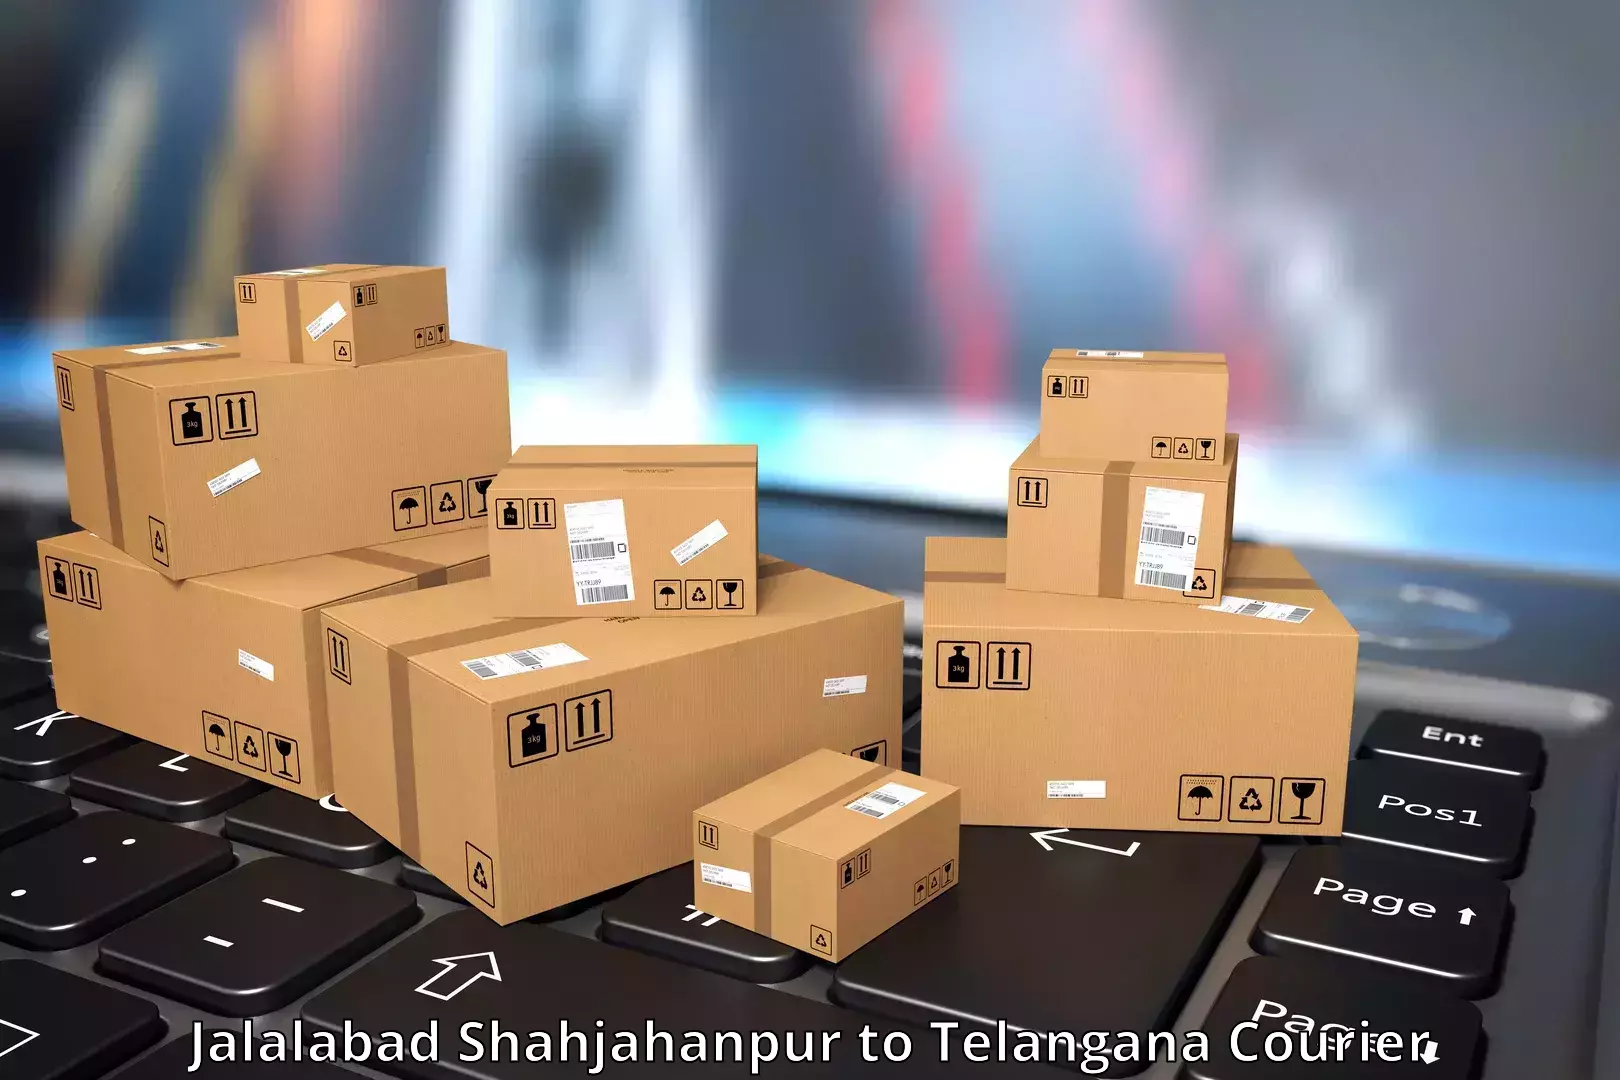 Reliable parcel services Jalalabad Shahjahanpur to Mulugu